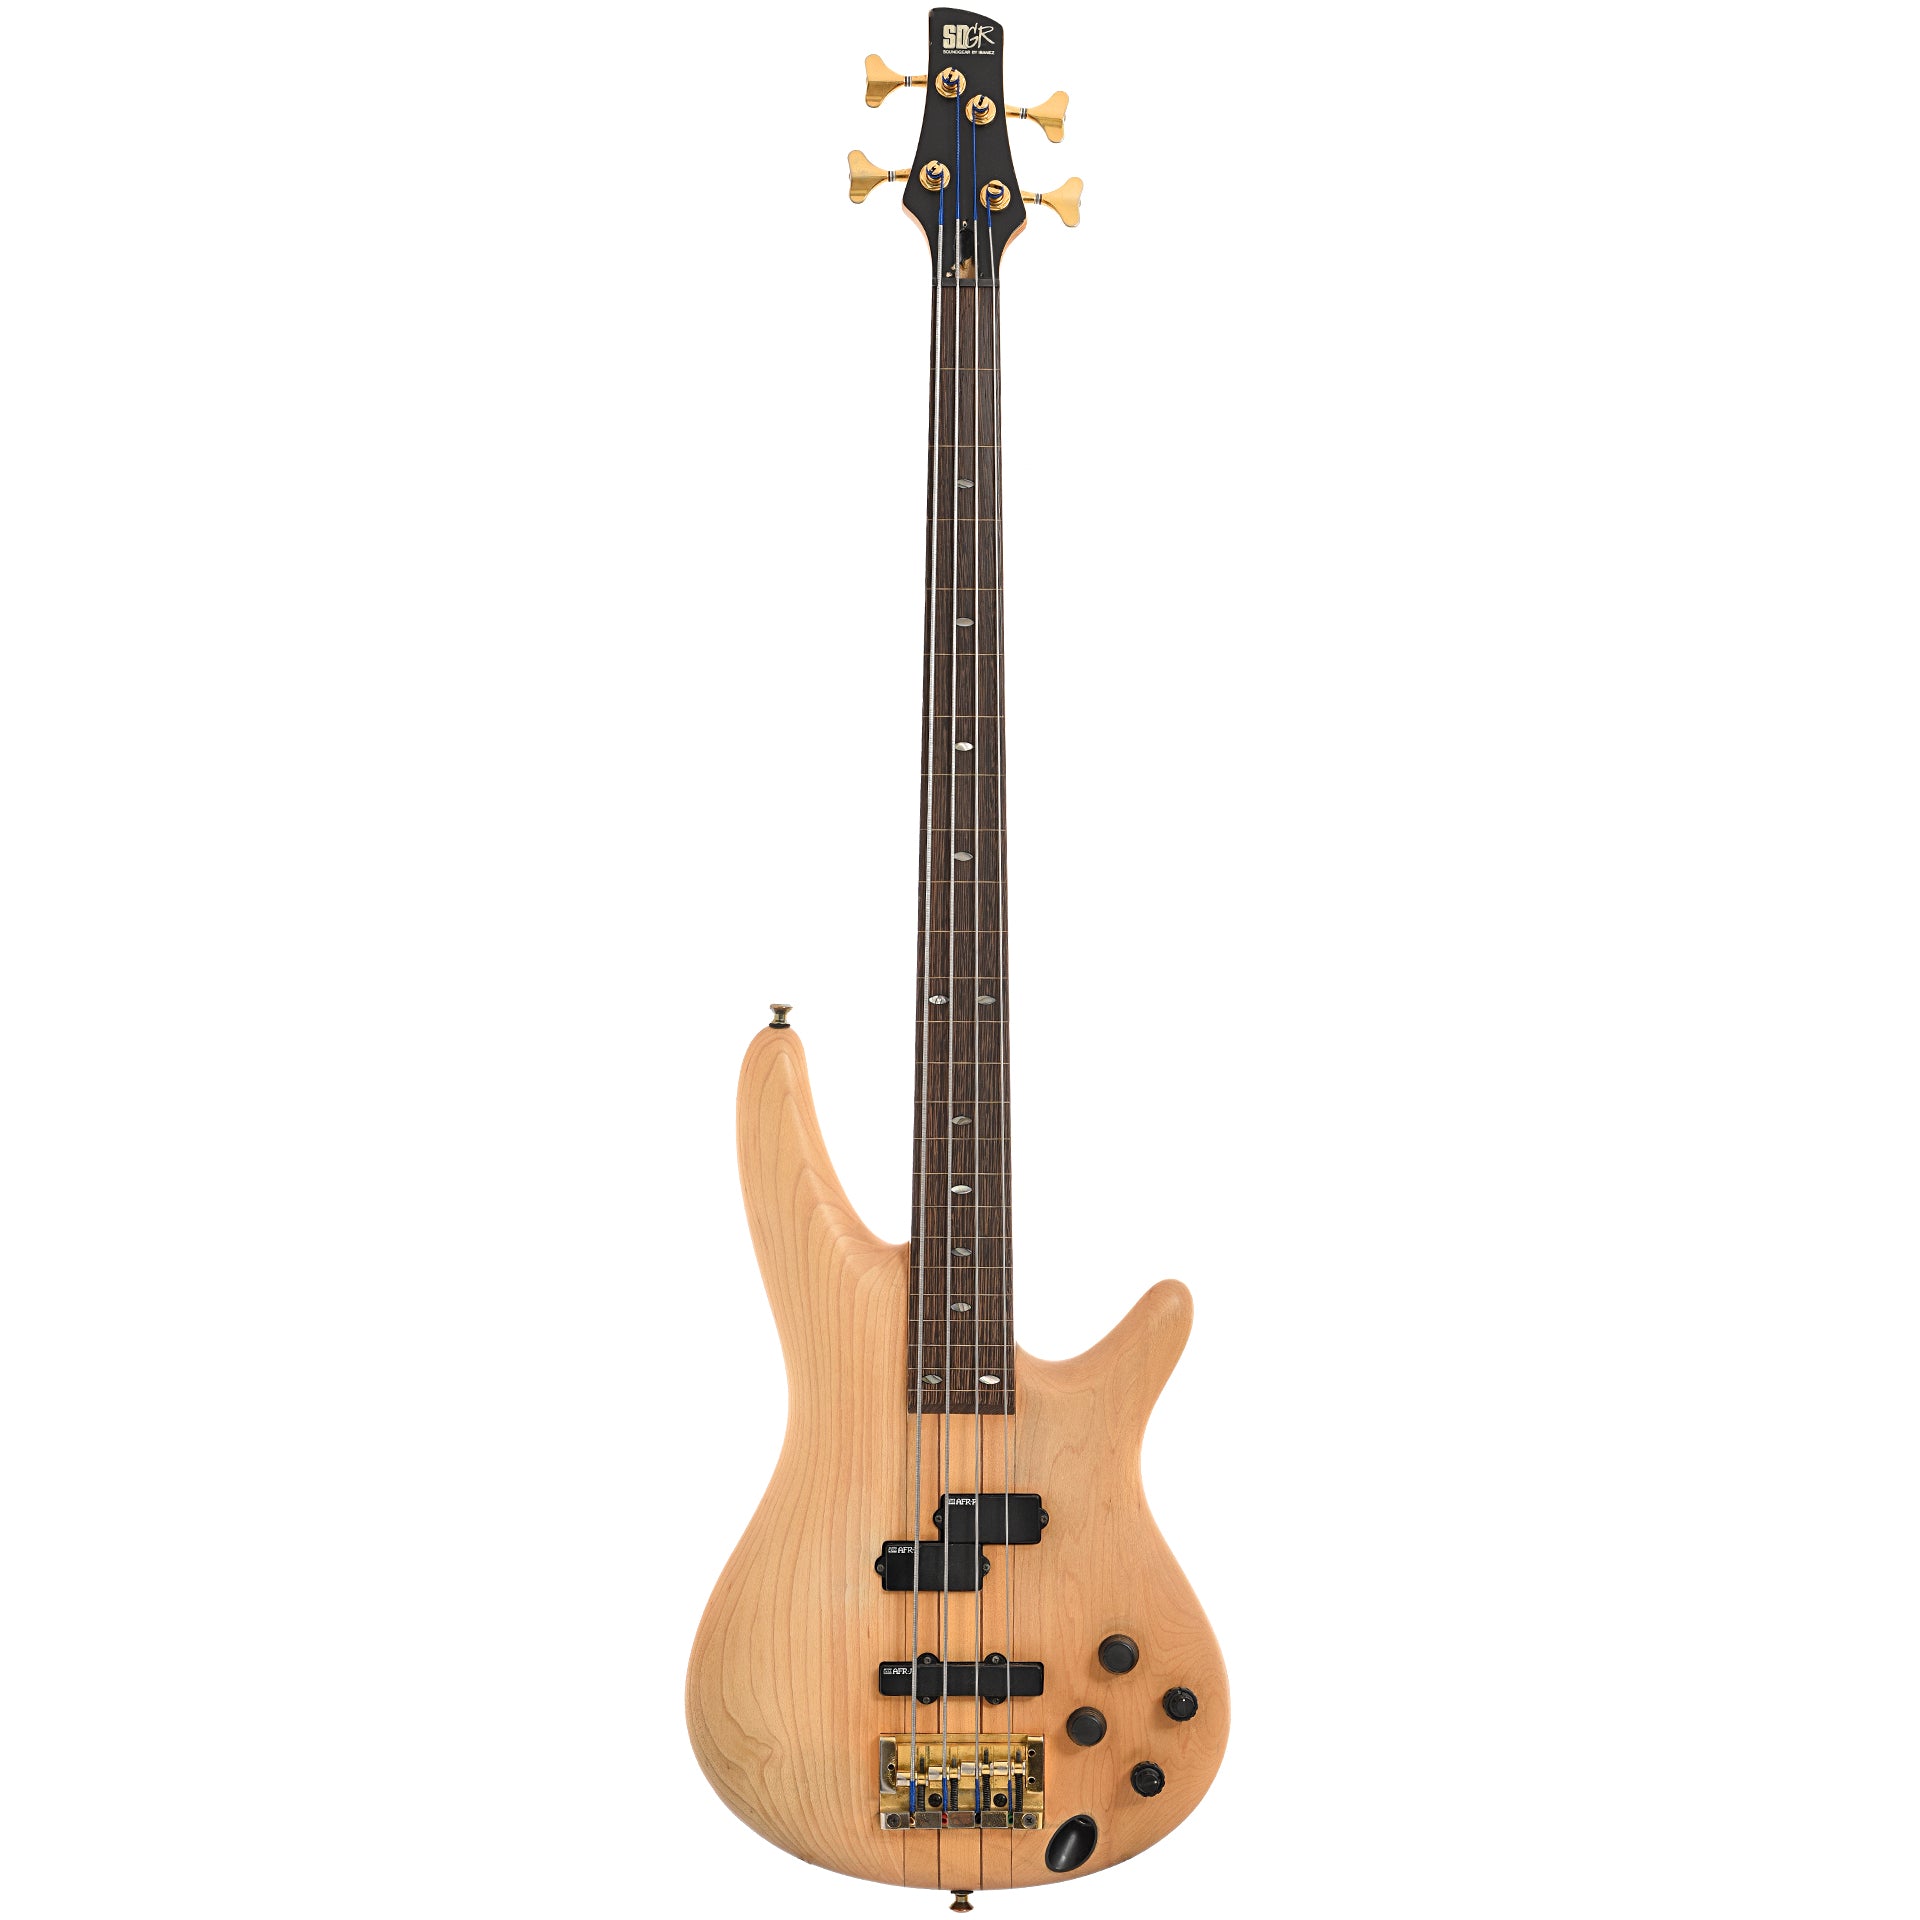 Full front of Ibanez SR2000 Fretless Electric Bass